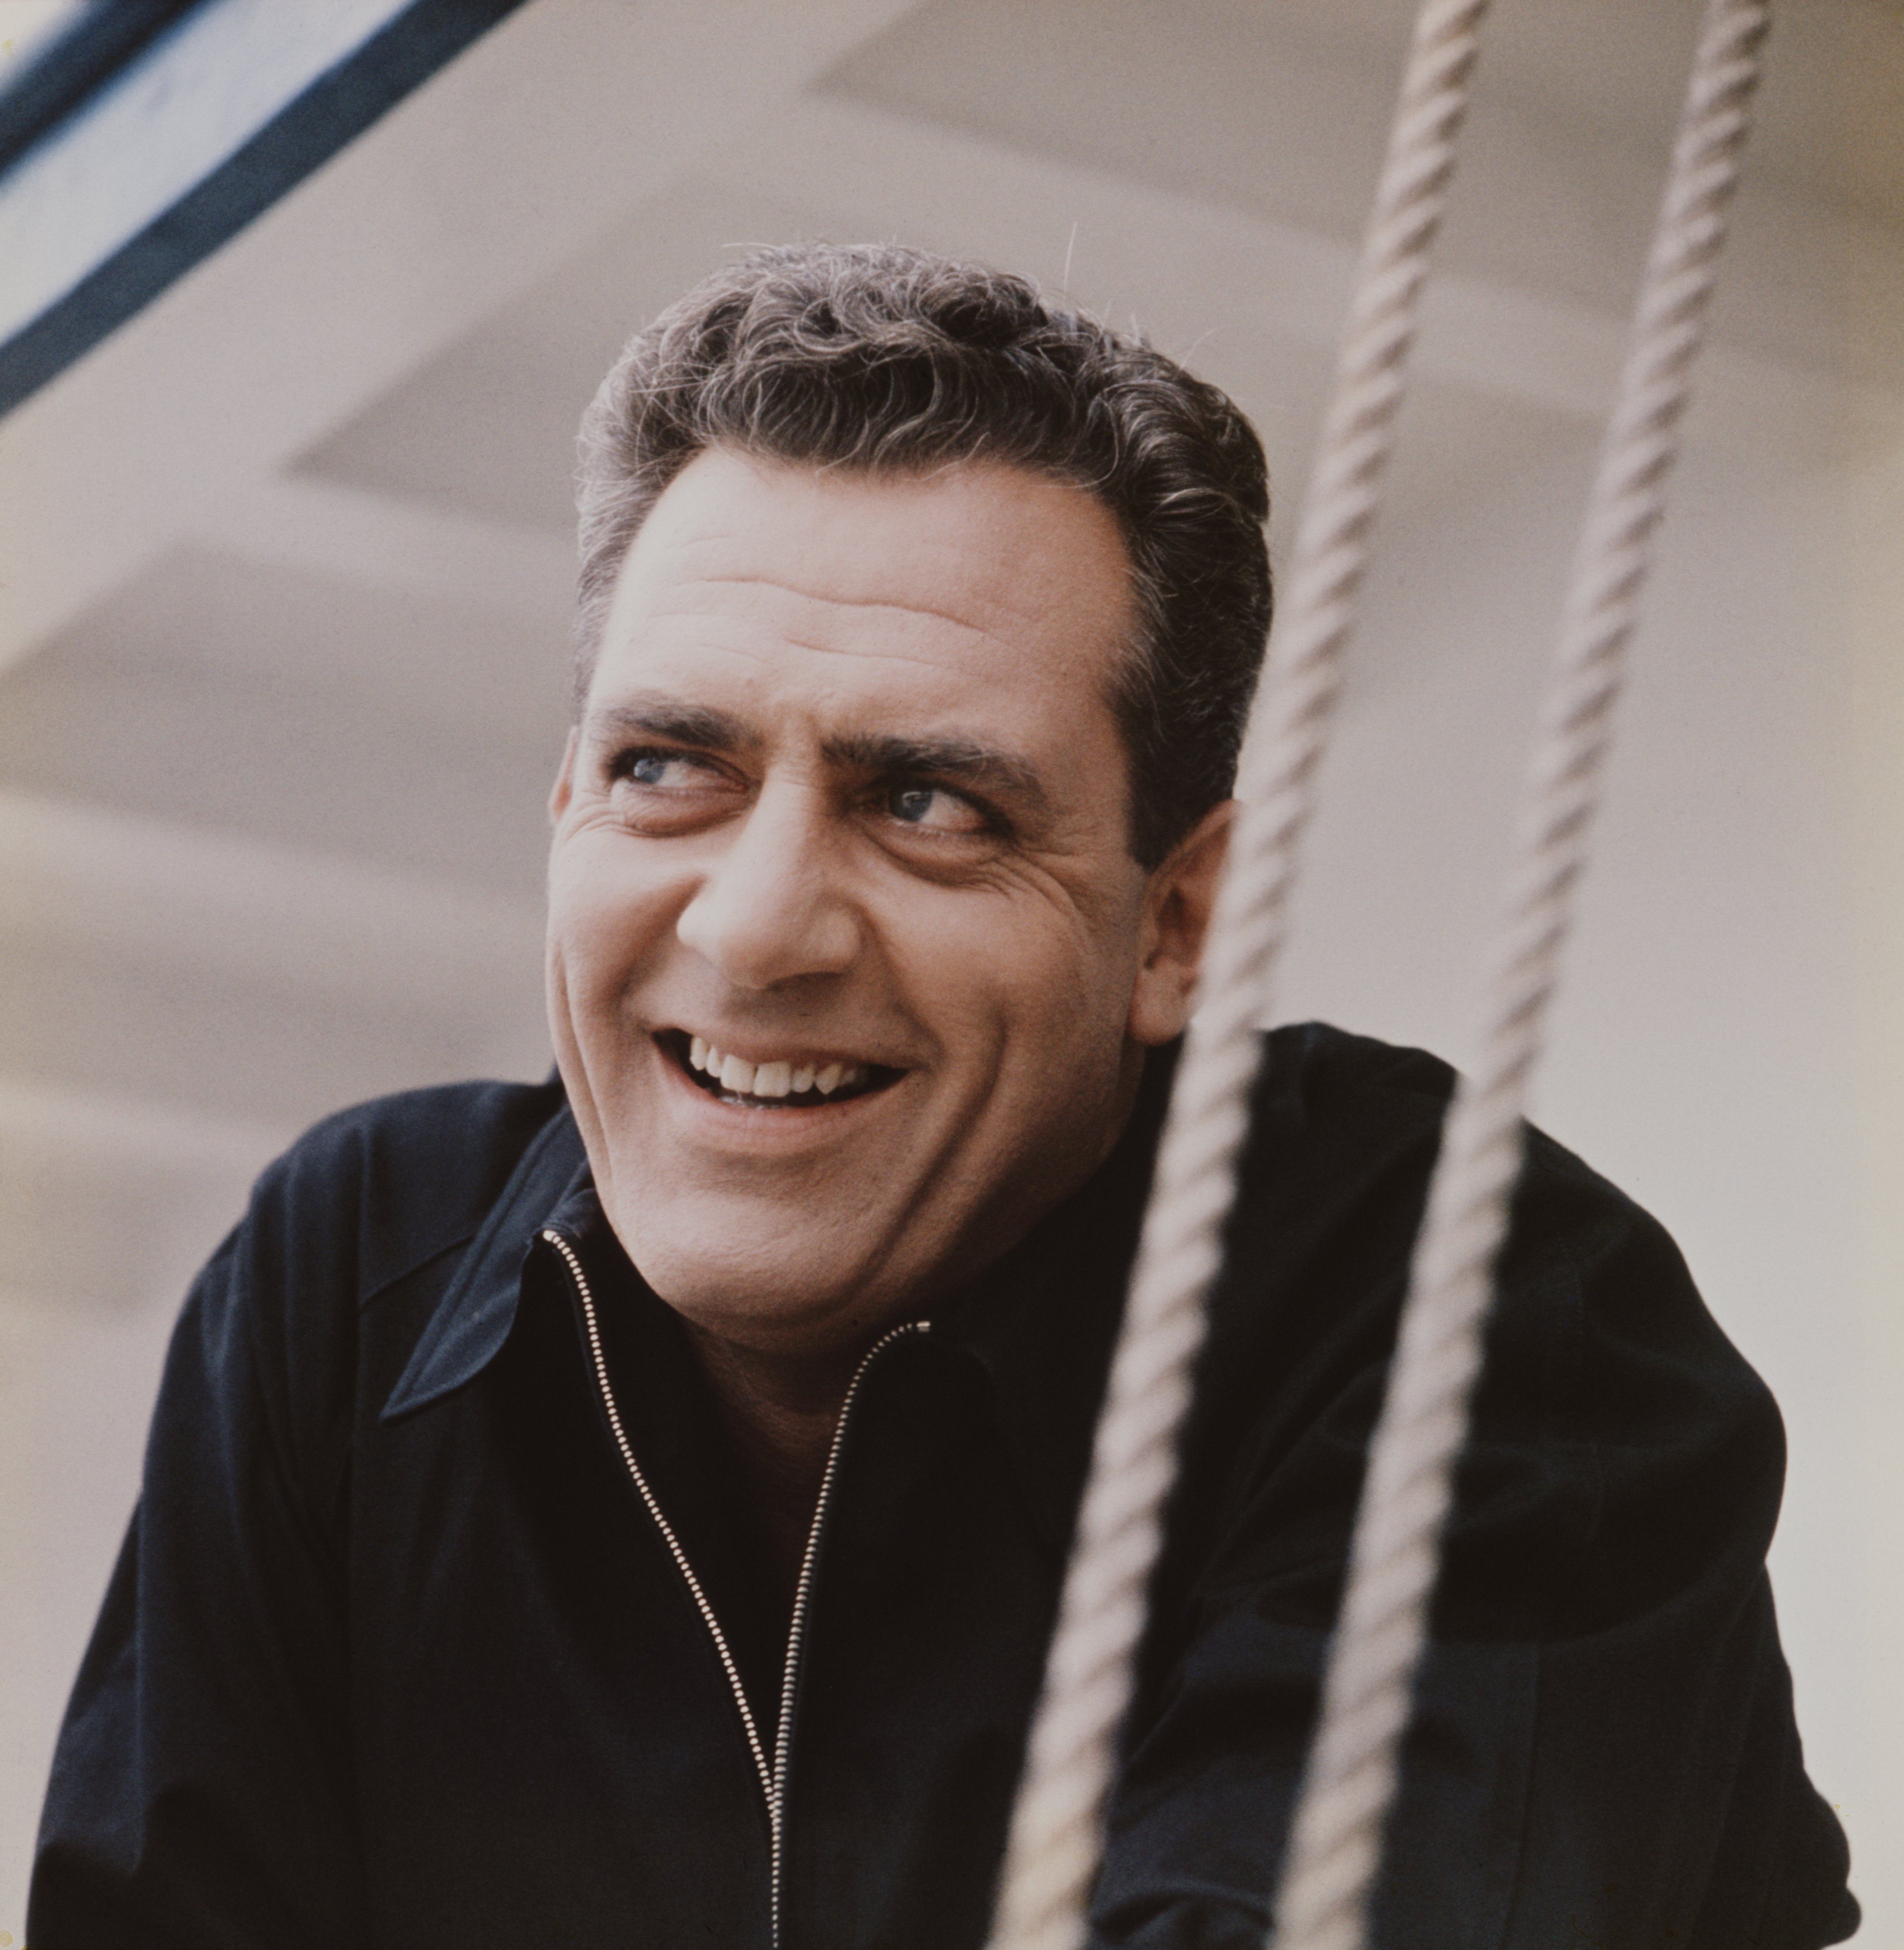 "Ironside" star Raymond Burr pictured smiling wearing a black jacket in 1962. / Source: Getty Images